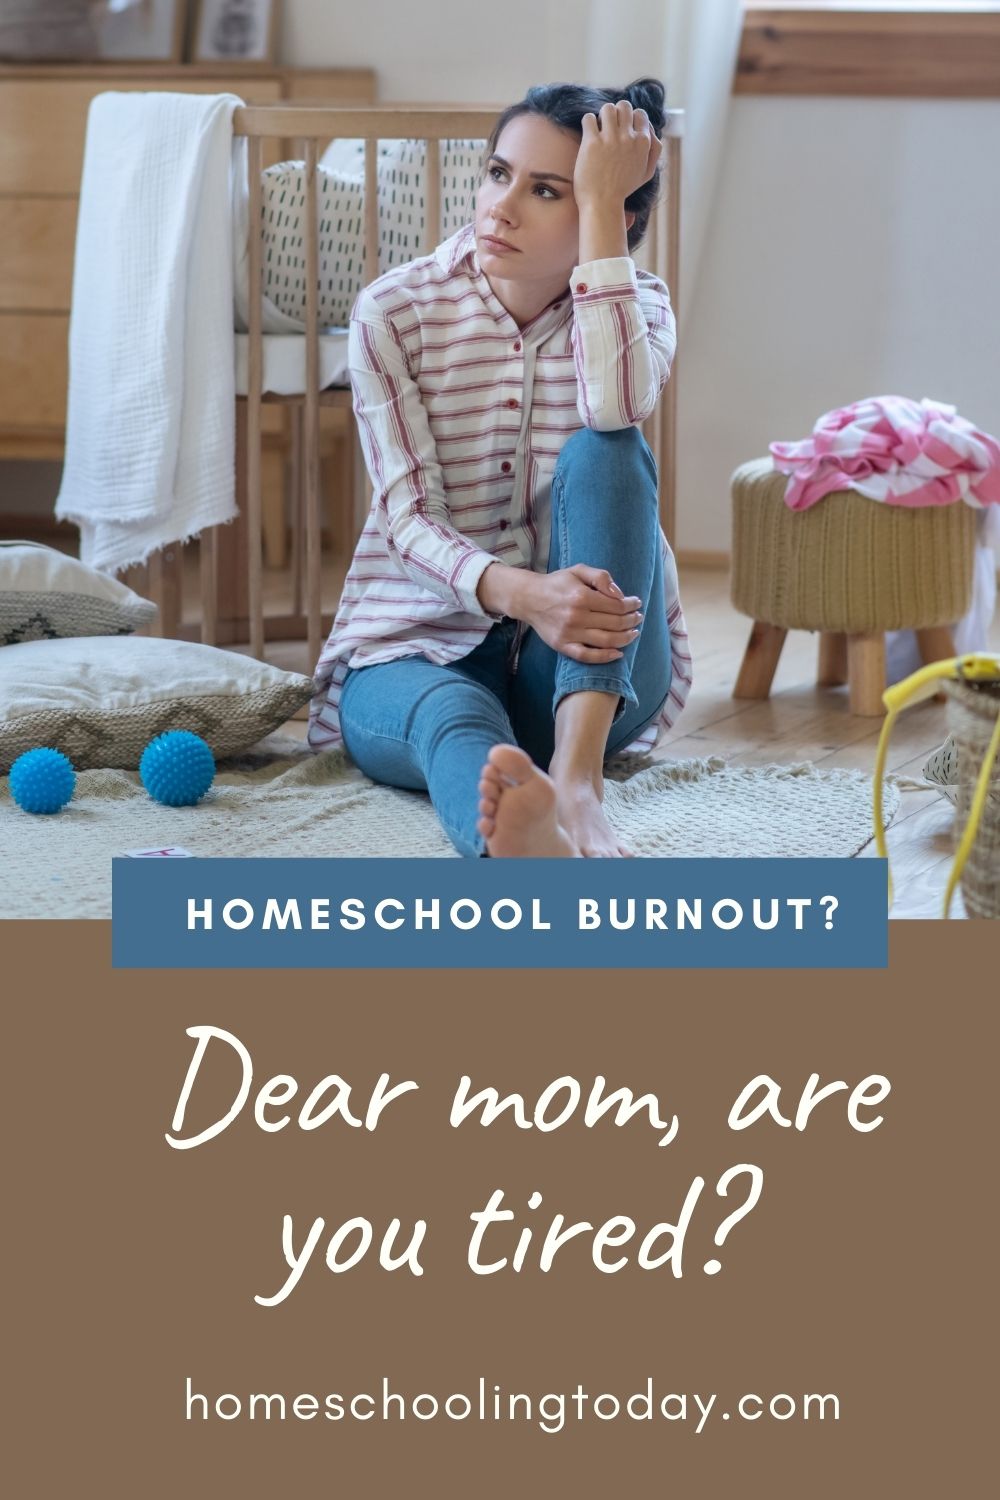 Homeschool Burnout: What You Need to Know About Rest